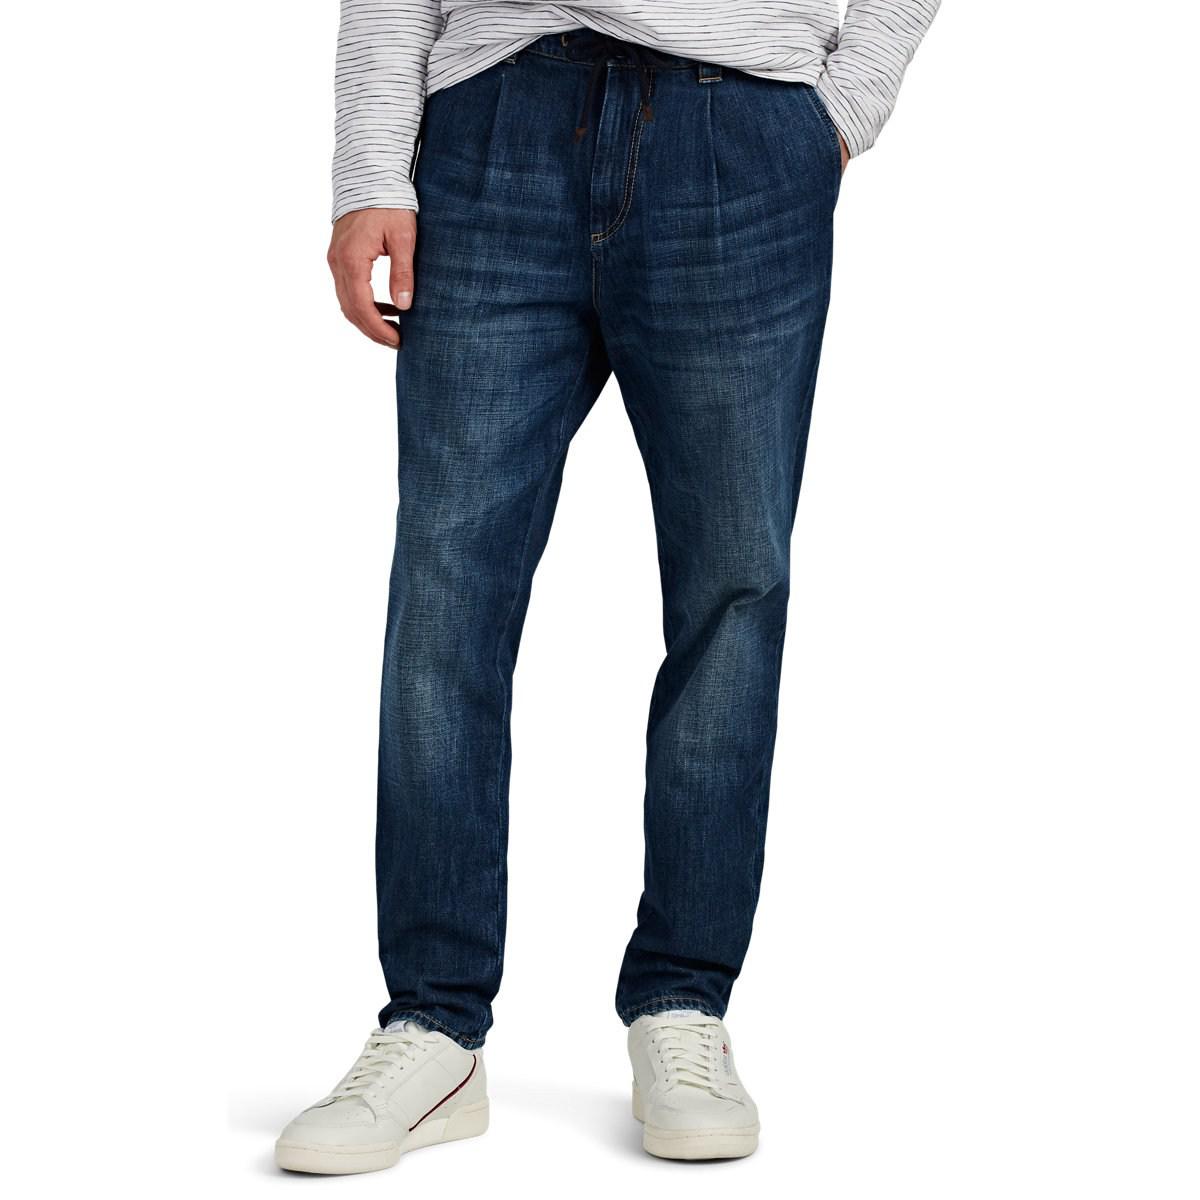 Lyst - Brunello Cucinelli Drawstring Pleated Jeans in Blue for Men